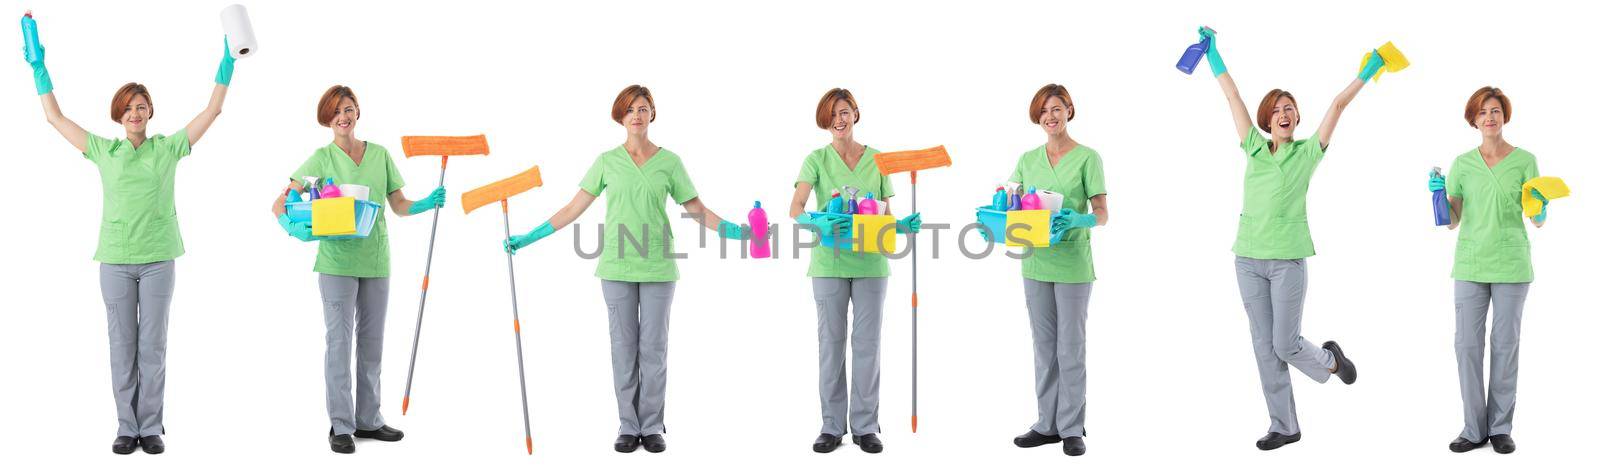 Set of Cleaning woman with tools full length portraits doing different gestures isolated on white background